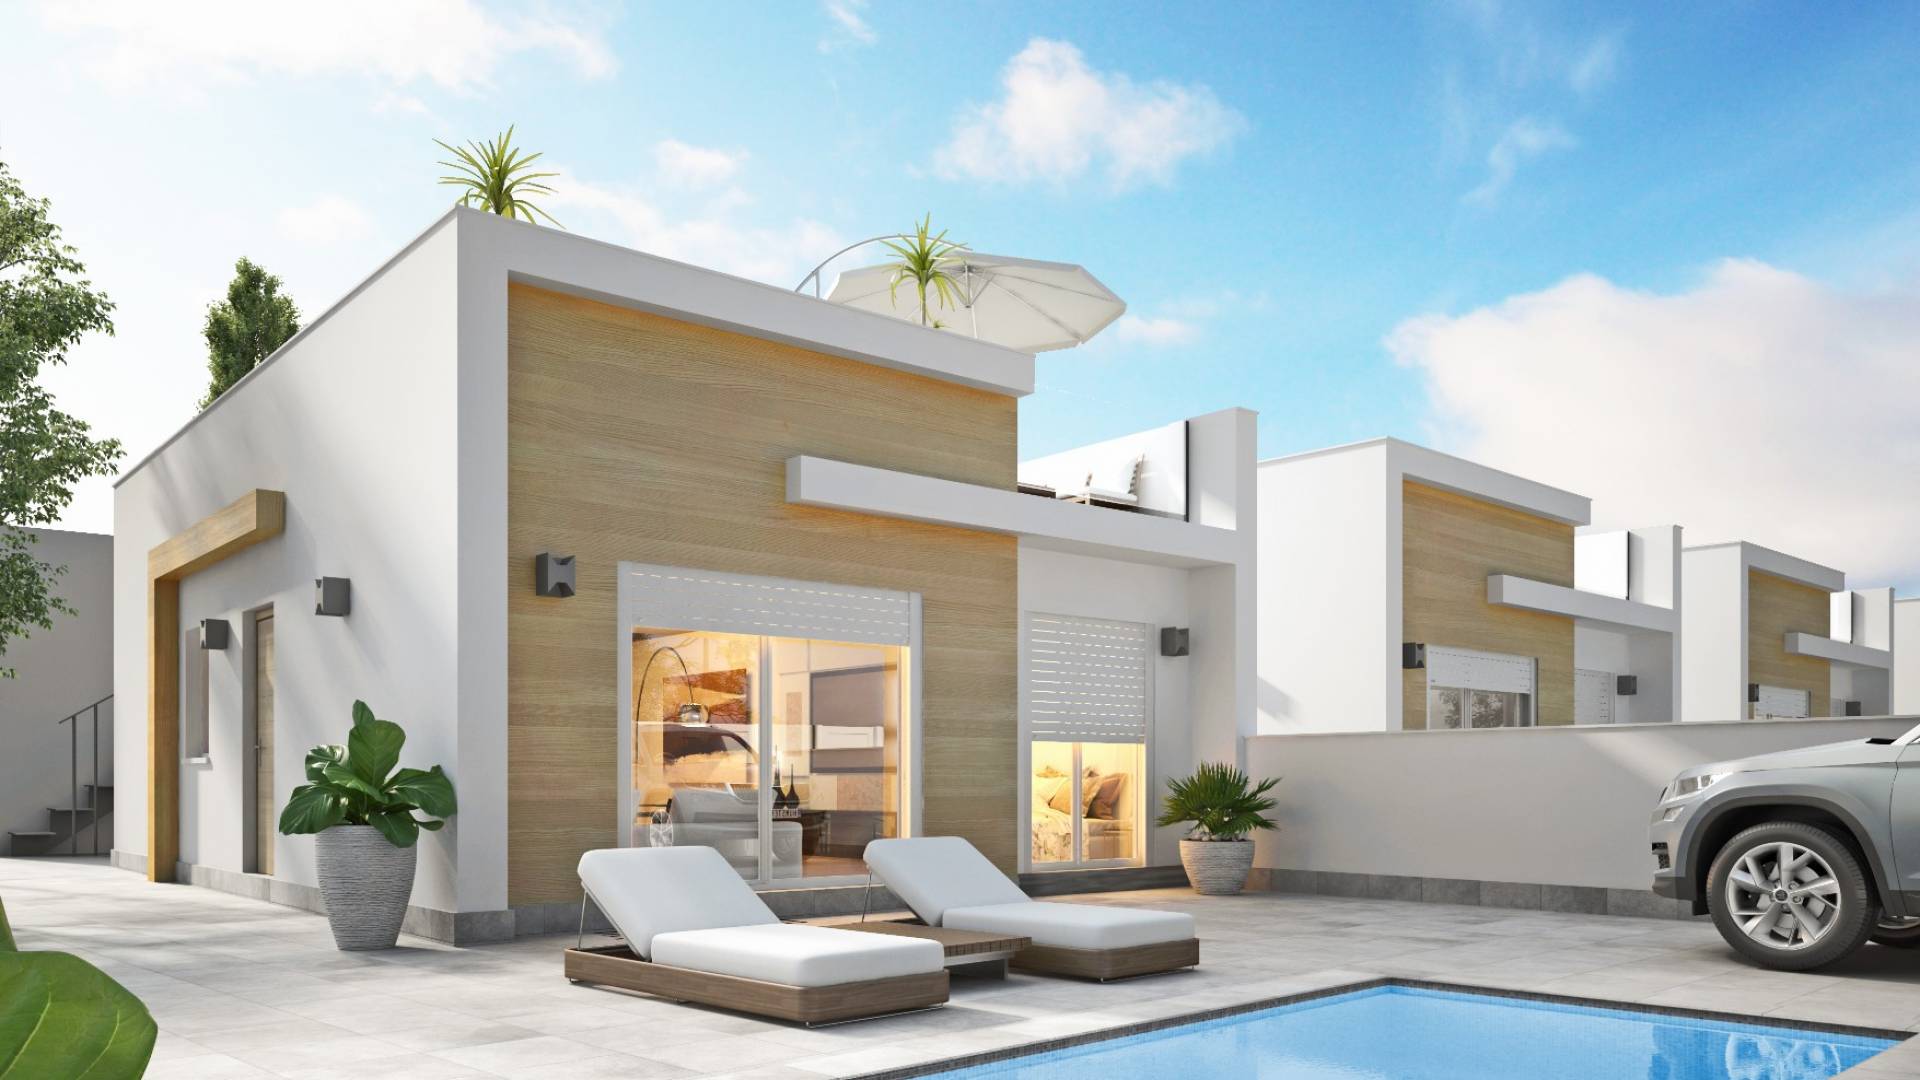 New Build - Independent villa - Avileses